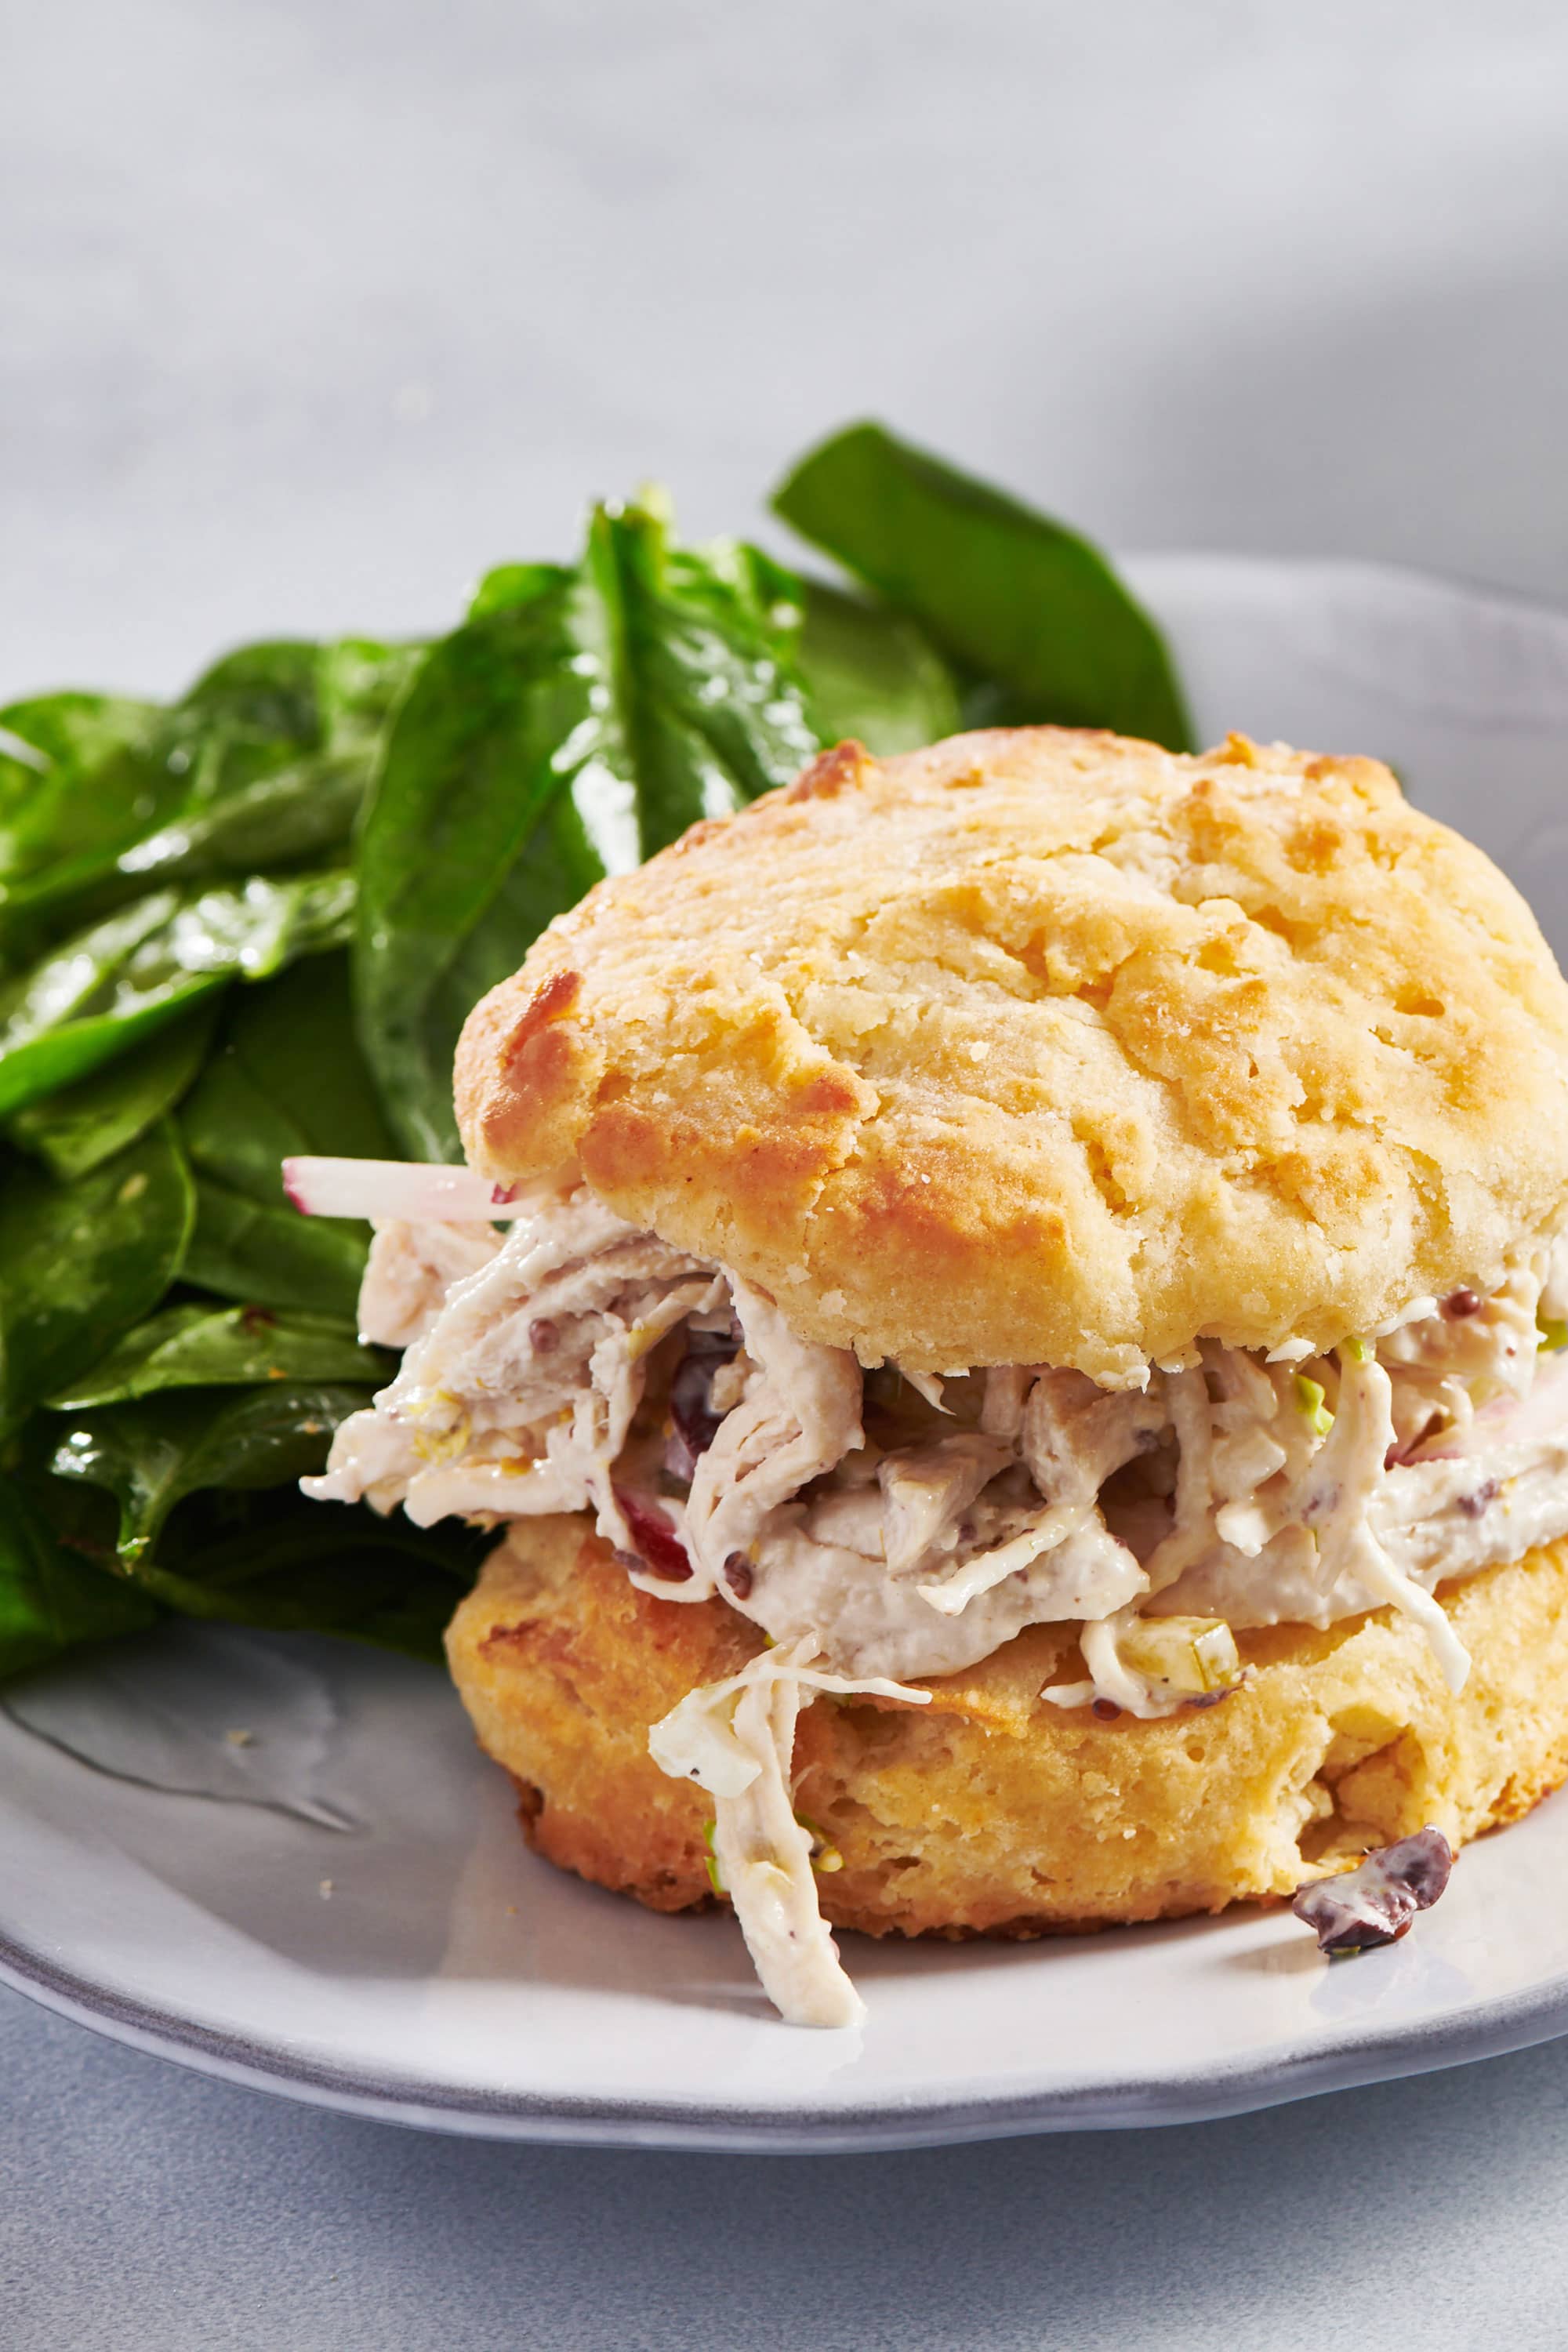 Best Chicken Salad in a biscuit sandwich on a plate with spinach salad.